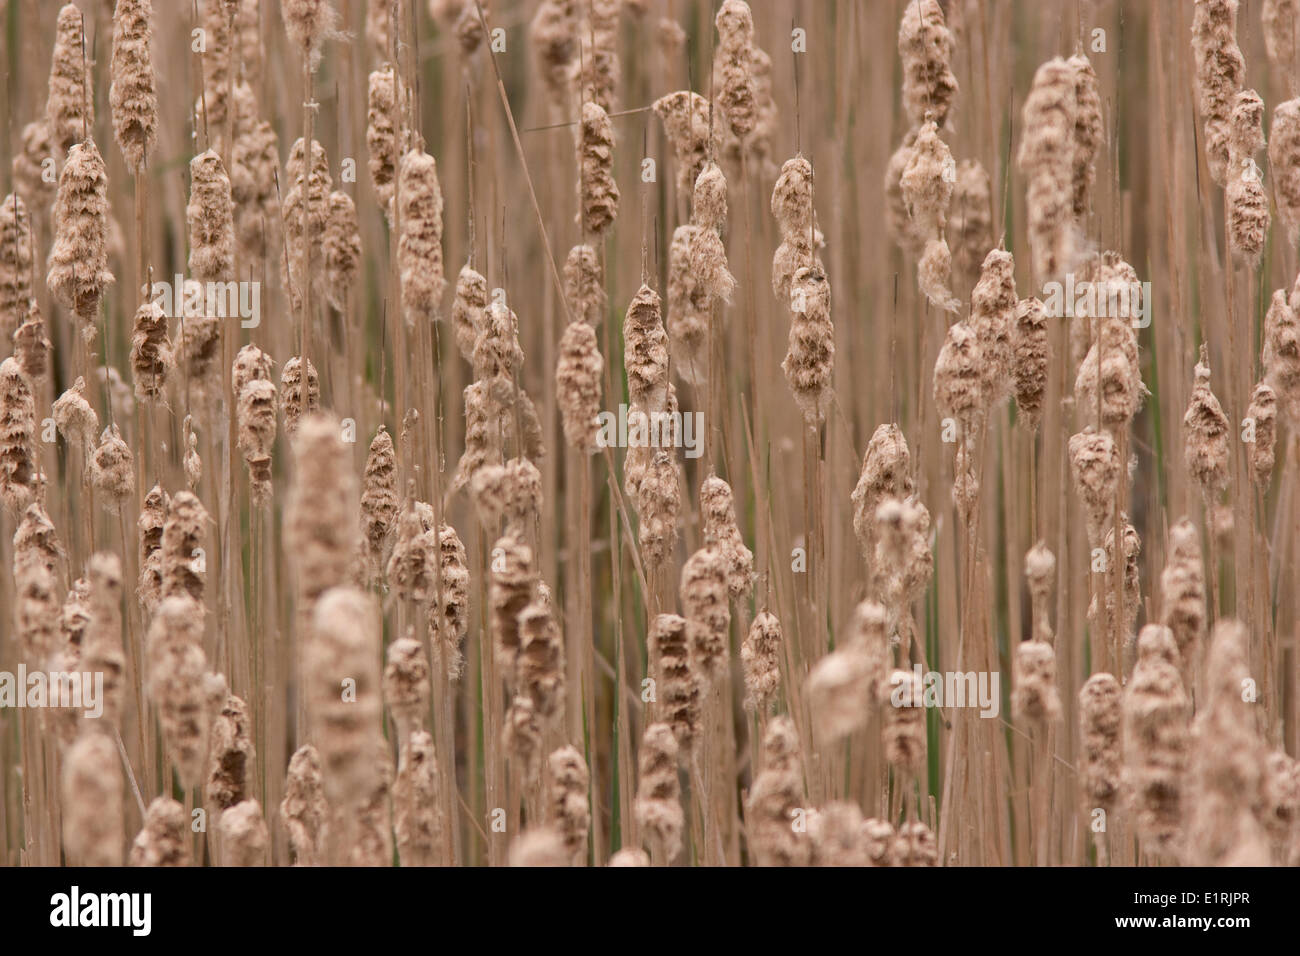 A field full of the ripe flower spikes of the Bul Rush. Stock Photo